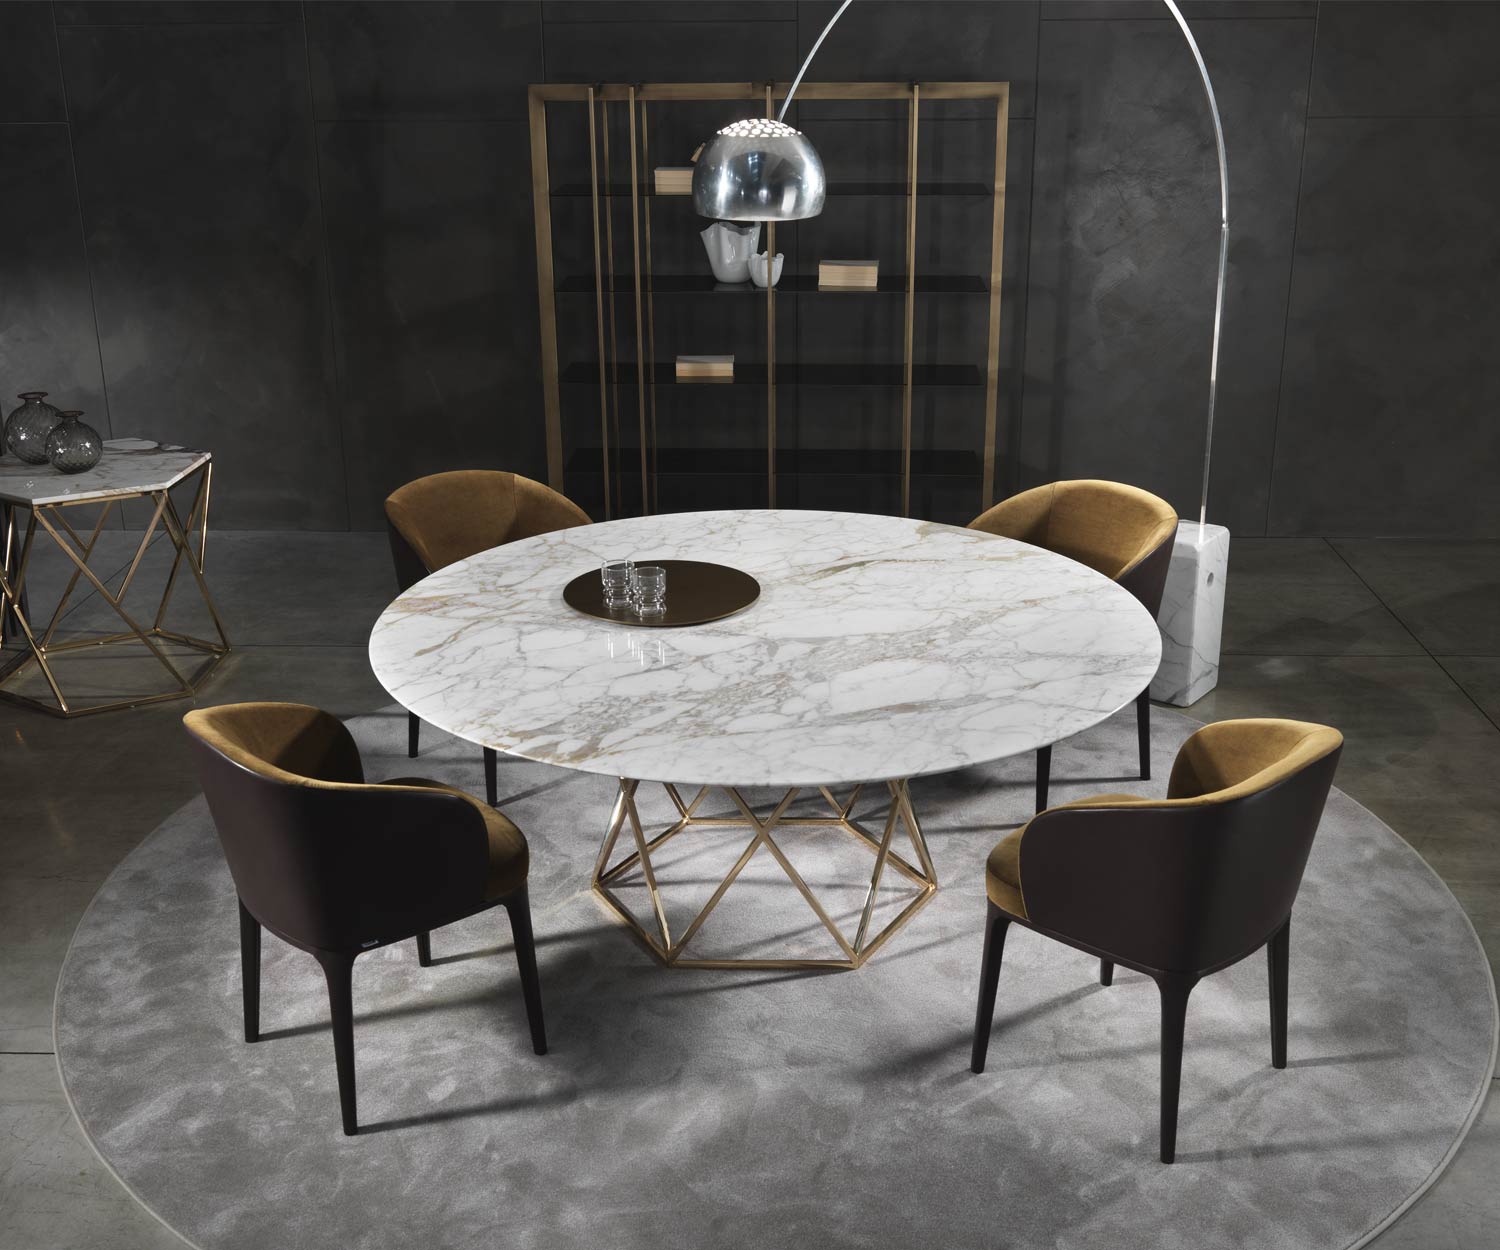 Design luxury dining table Marelli Tatlin marble with chairs in the dining room